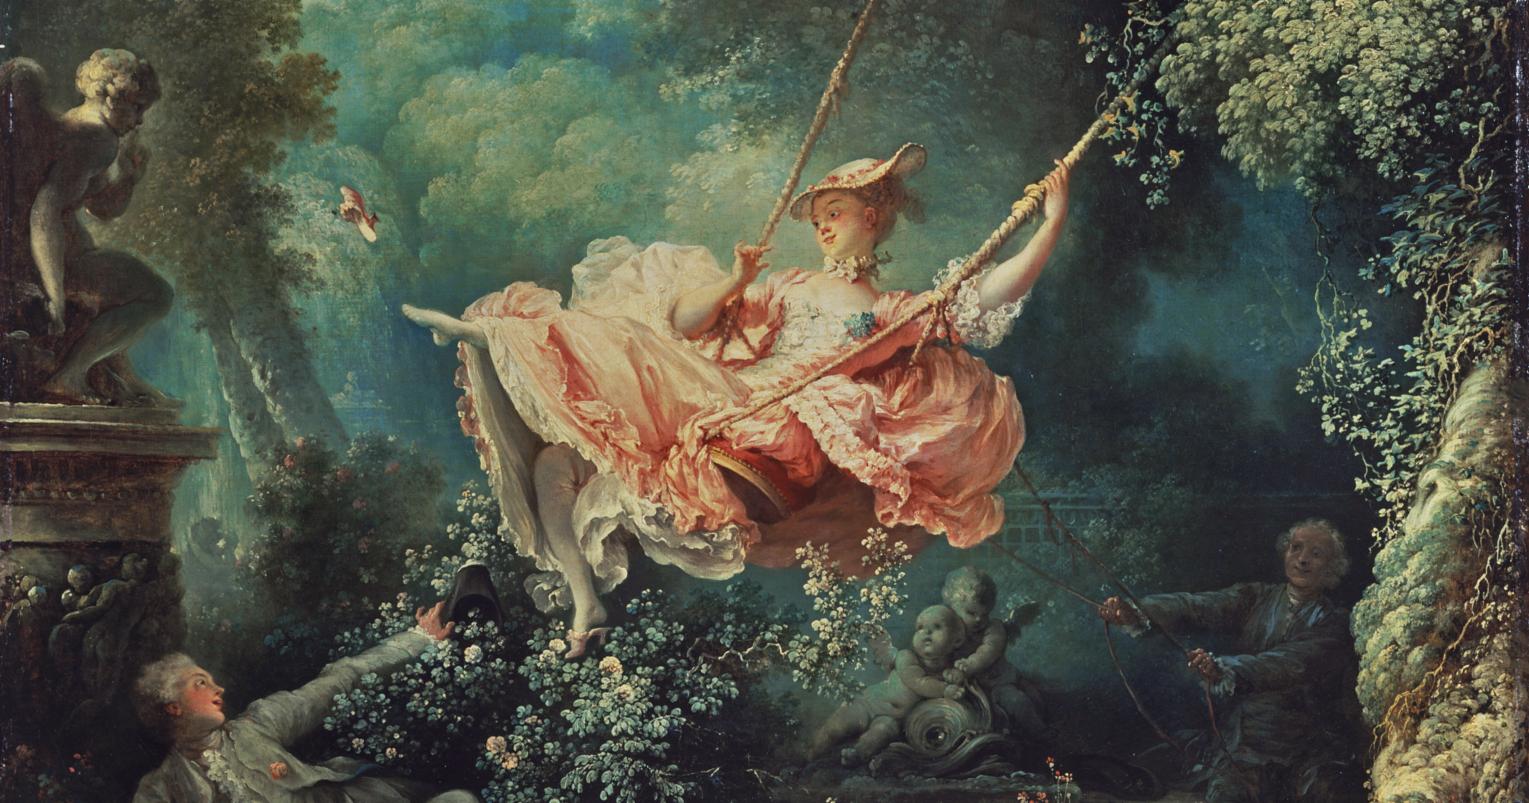 An 18th century oil painting depicting a woman gayly swinging over a floral bush as her shoe flies off. The man beneath her is falling onto the base of an angel statue. There is another man farther behind her, holding ropes attached to the swing to help push her.